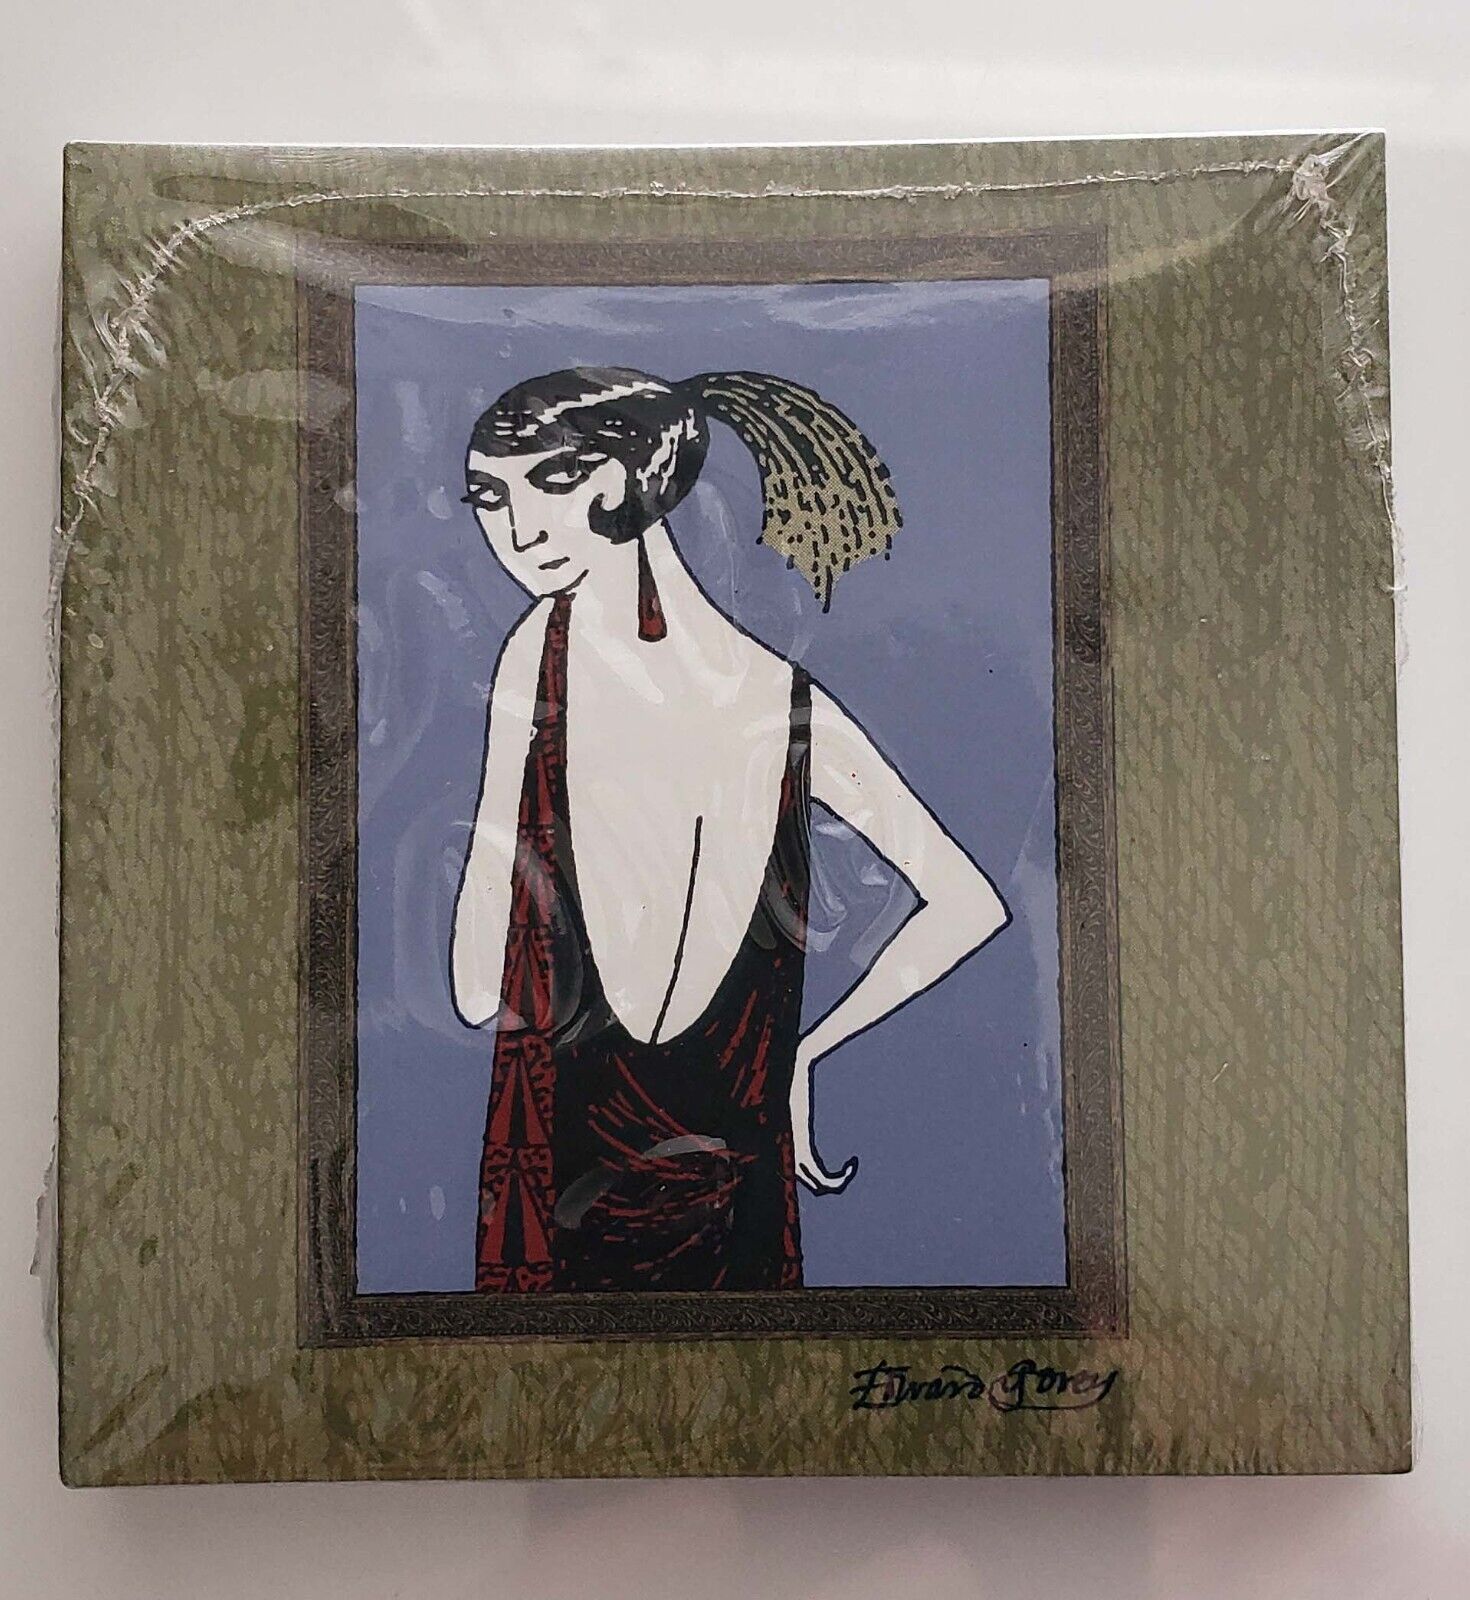 Edward Gorey Flapper Girl Gift Cards 12 Un-used rare out of print Pop Art Icon